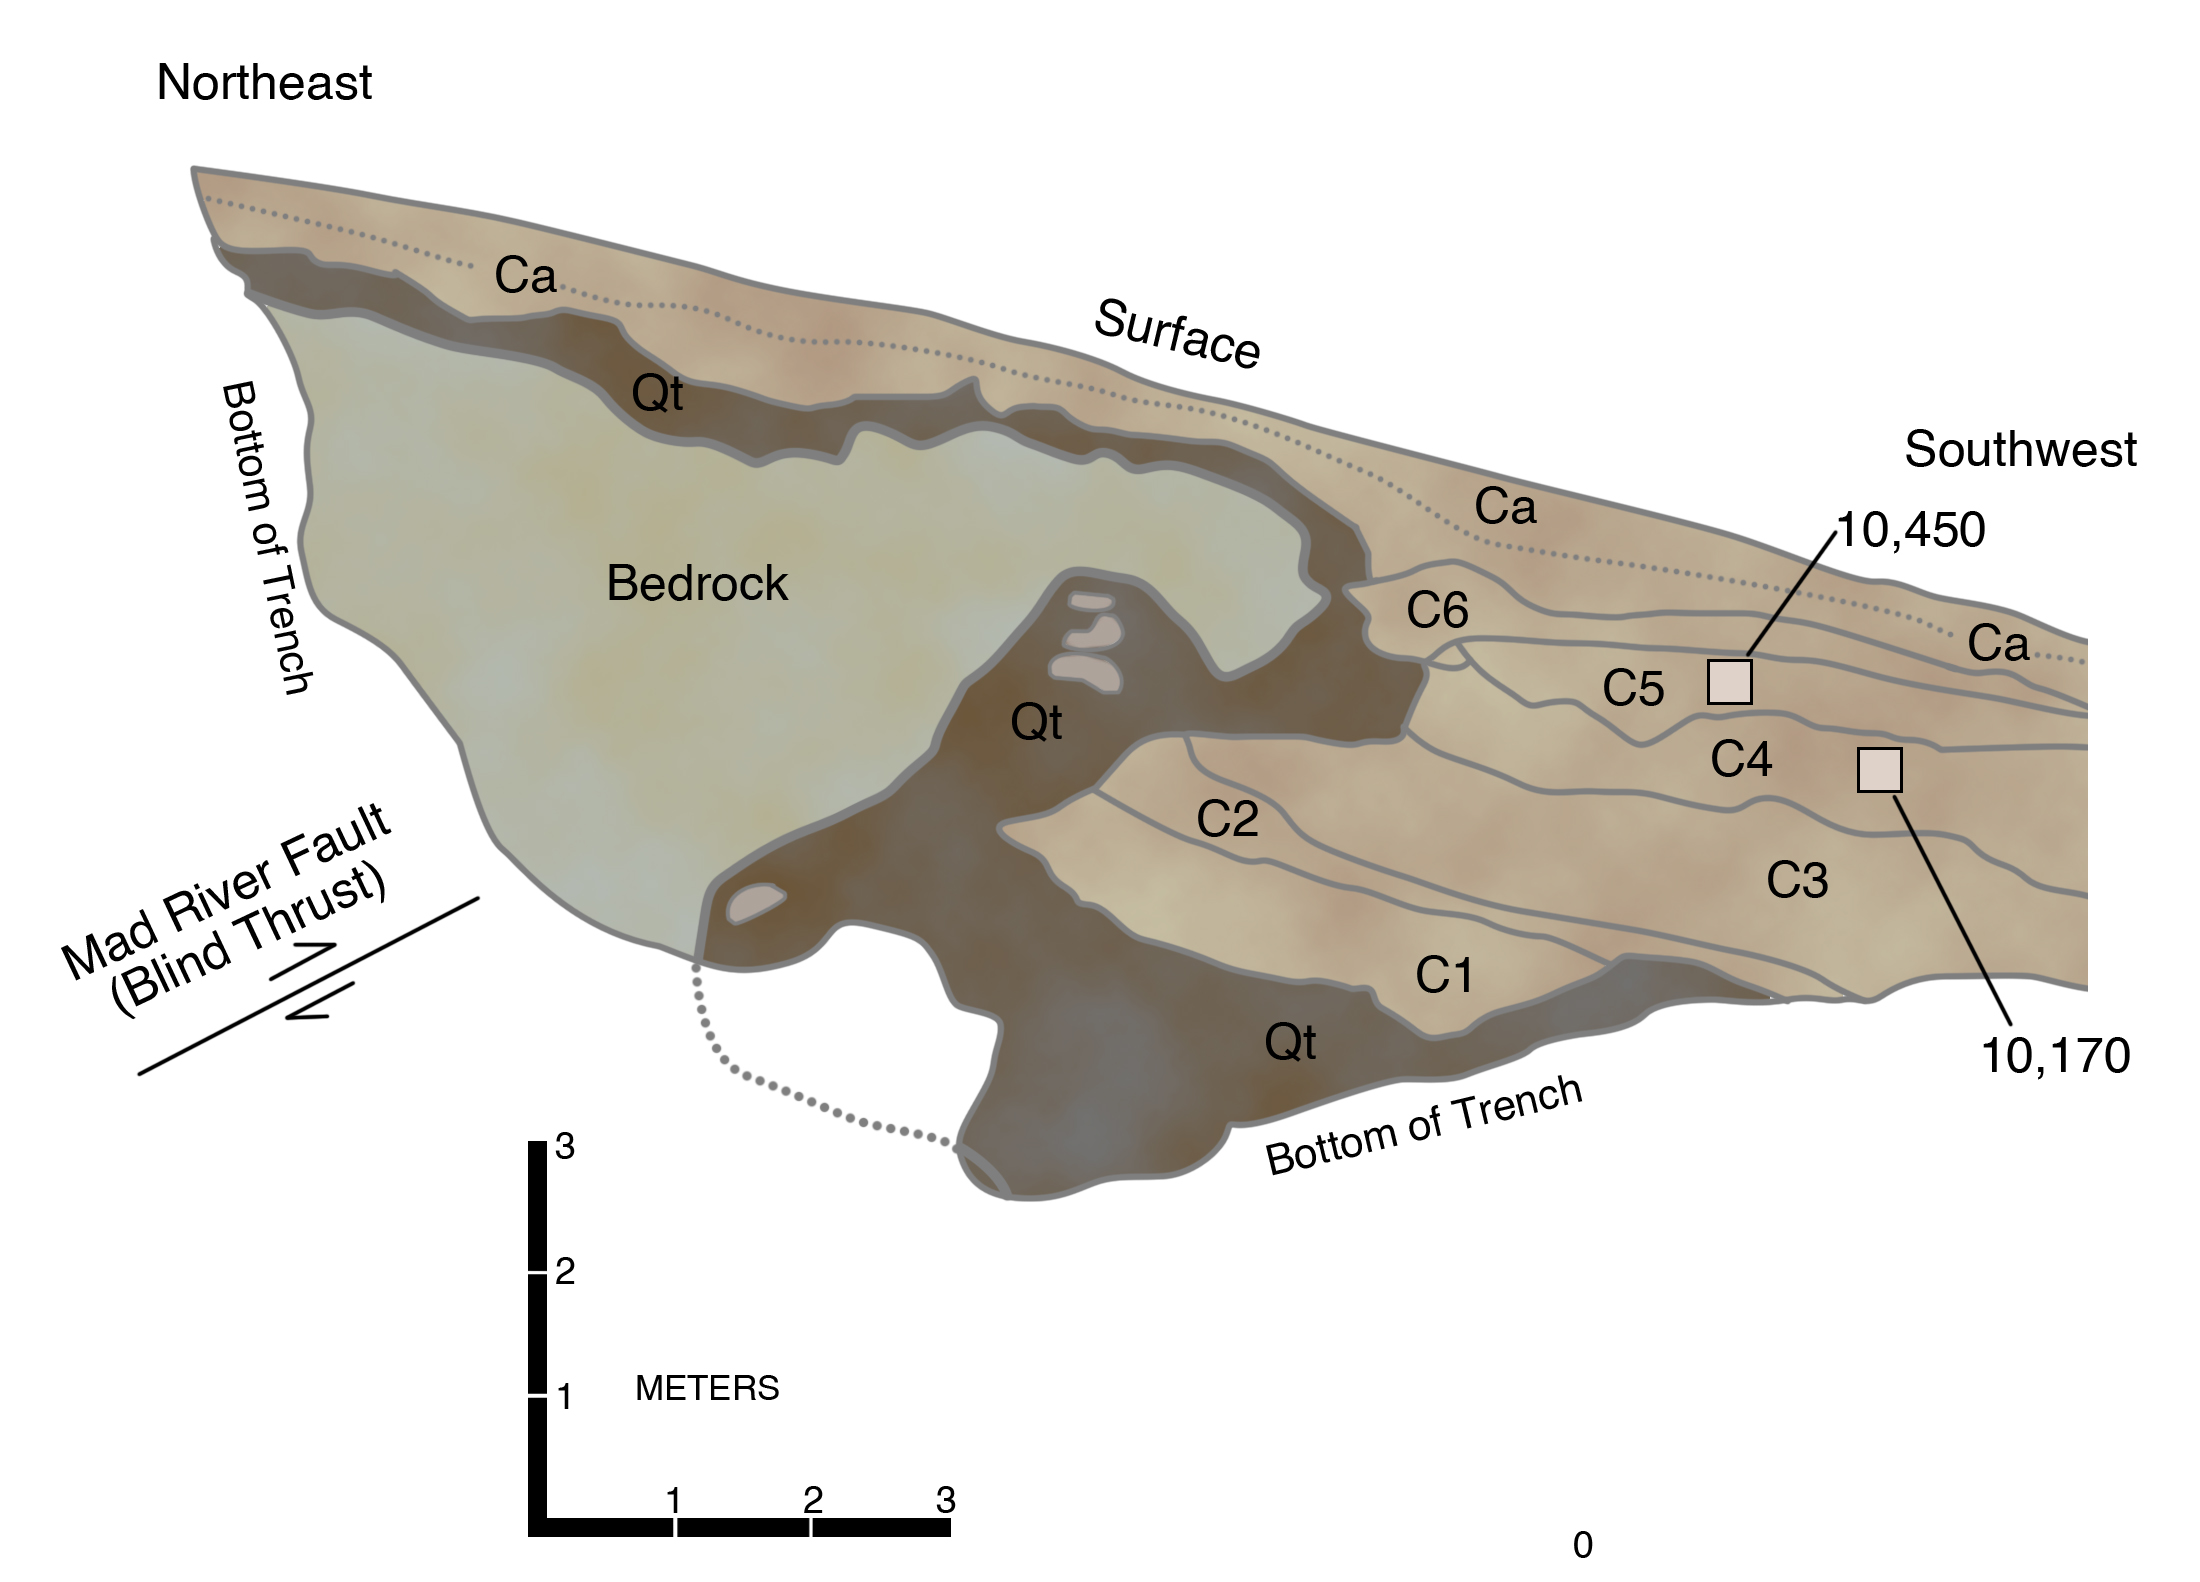 Log of side of backhoe trench across a scarp of the Mad River Thrust Fault at McKinleyville, California, showing how bedrock has been thrust over sediments that are radiocarbon dated at about ten thousand years